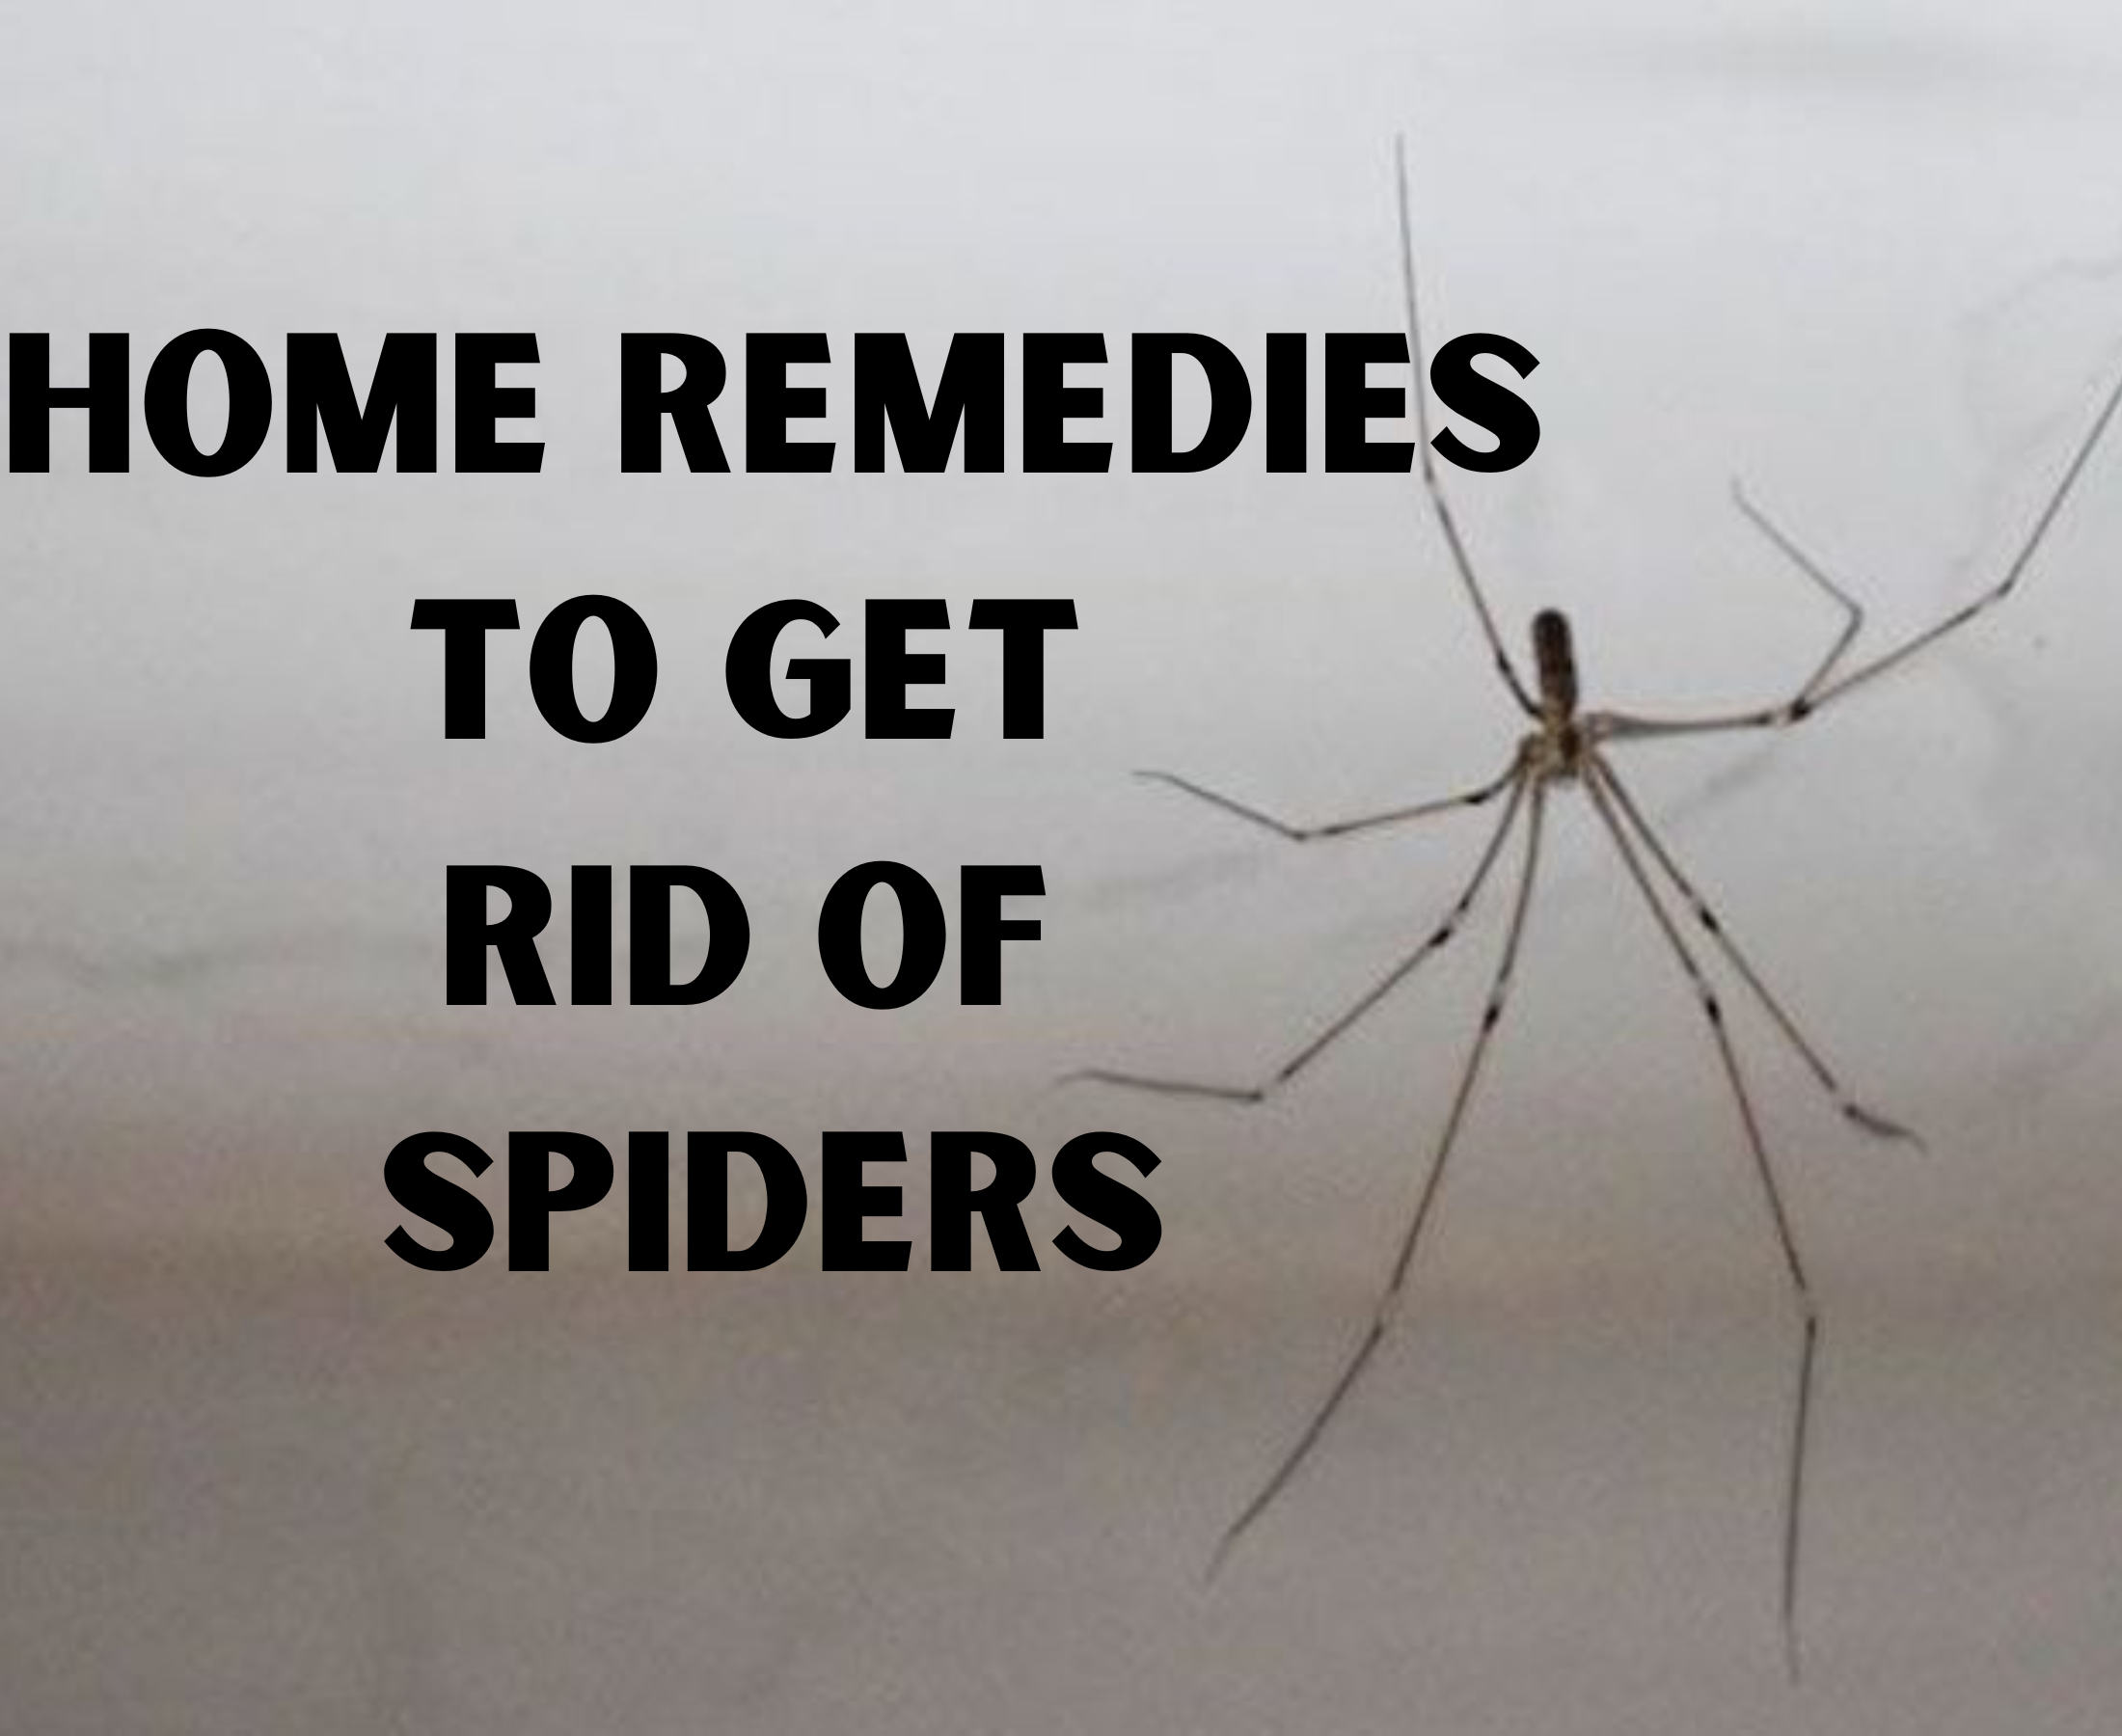 What home remedies will kill spiders?